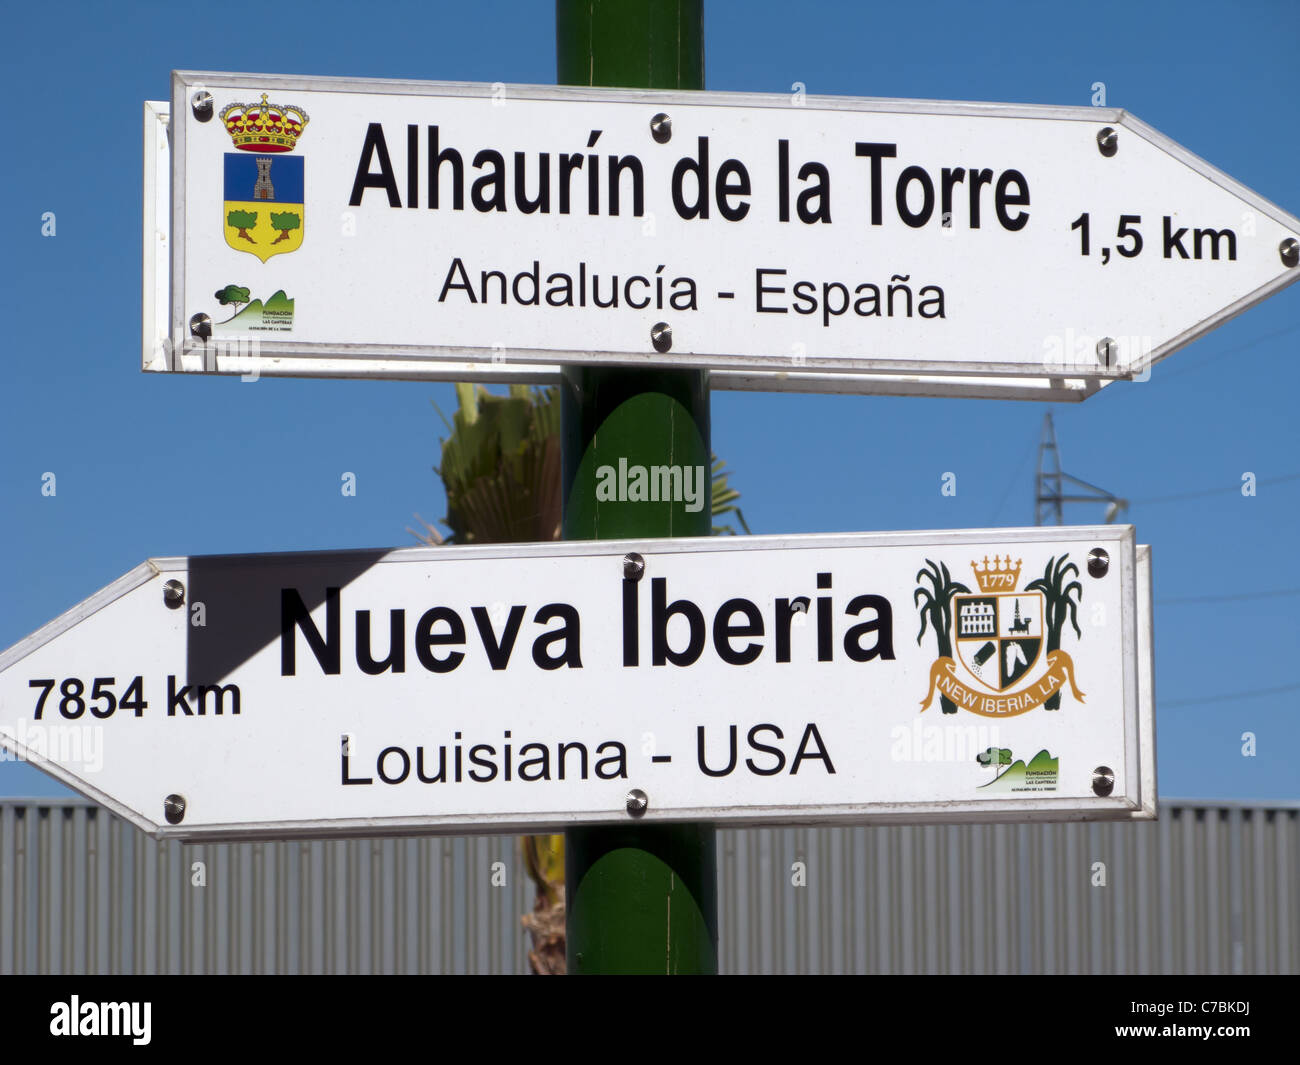 A direction sign pointing to New Iberia, Louisiana from Iberia Spain Stock Photo